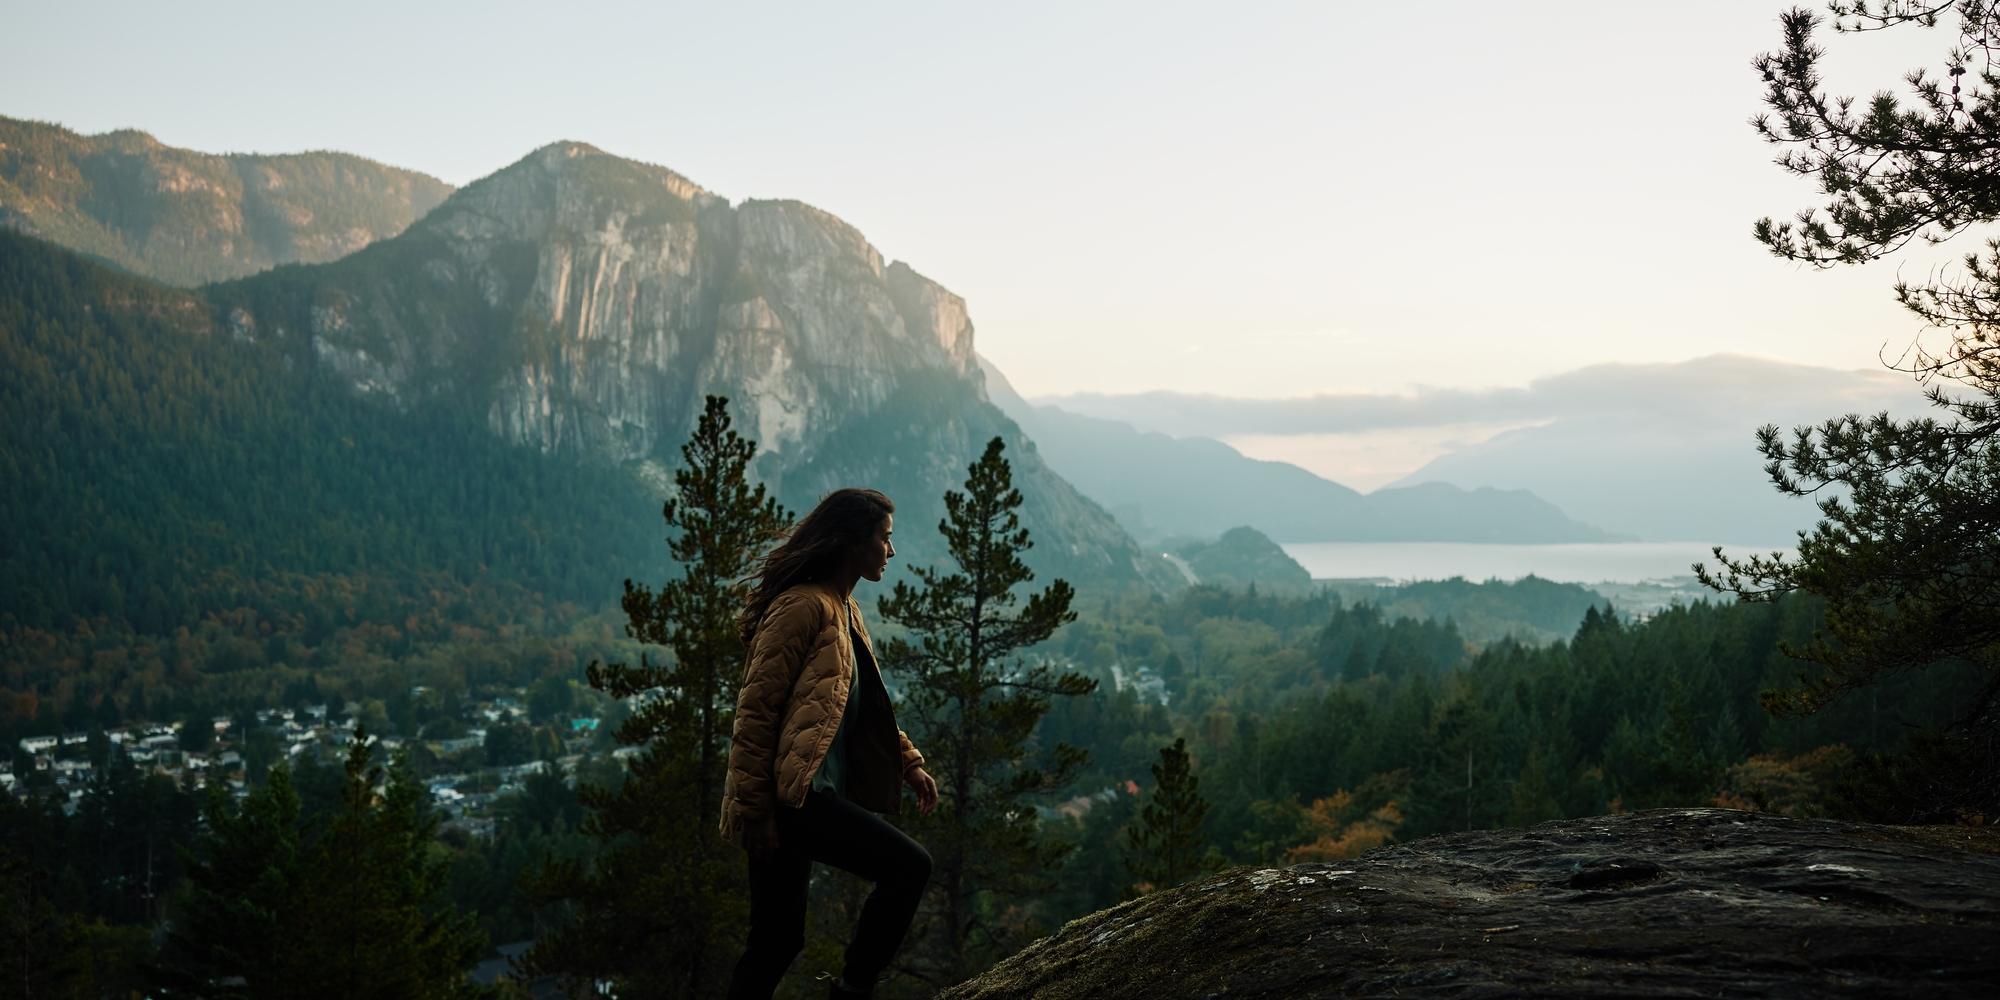 Enjoying a guided hike in Squamish with the Sea to Sky Adventure Company | Hubert Kang